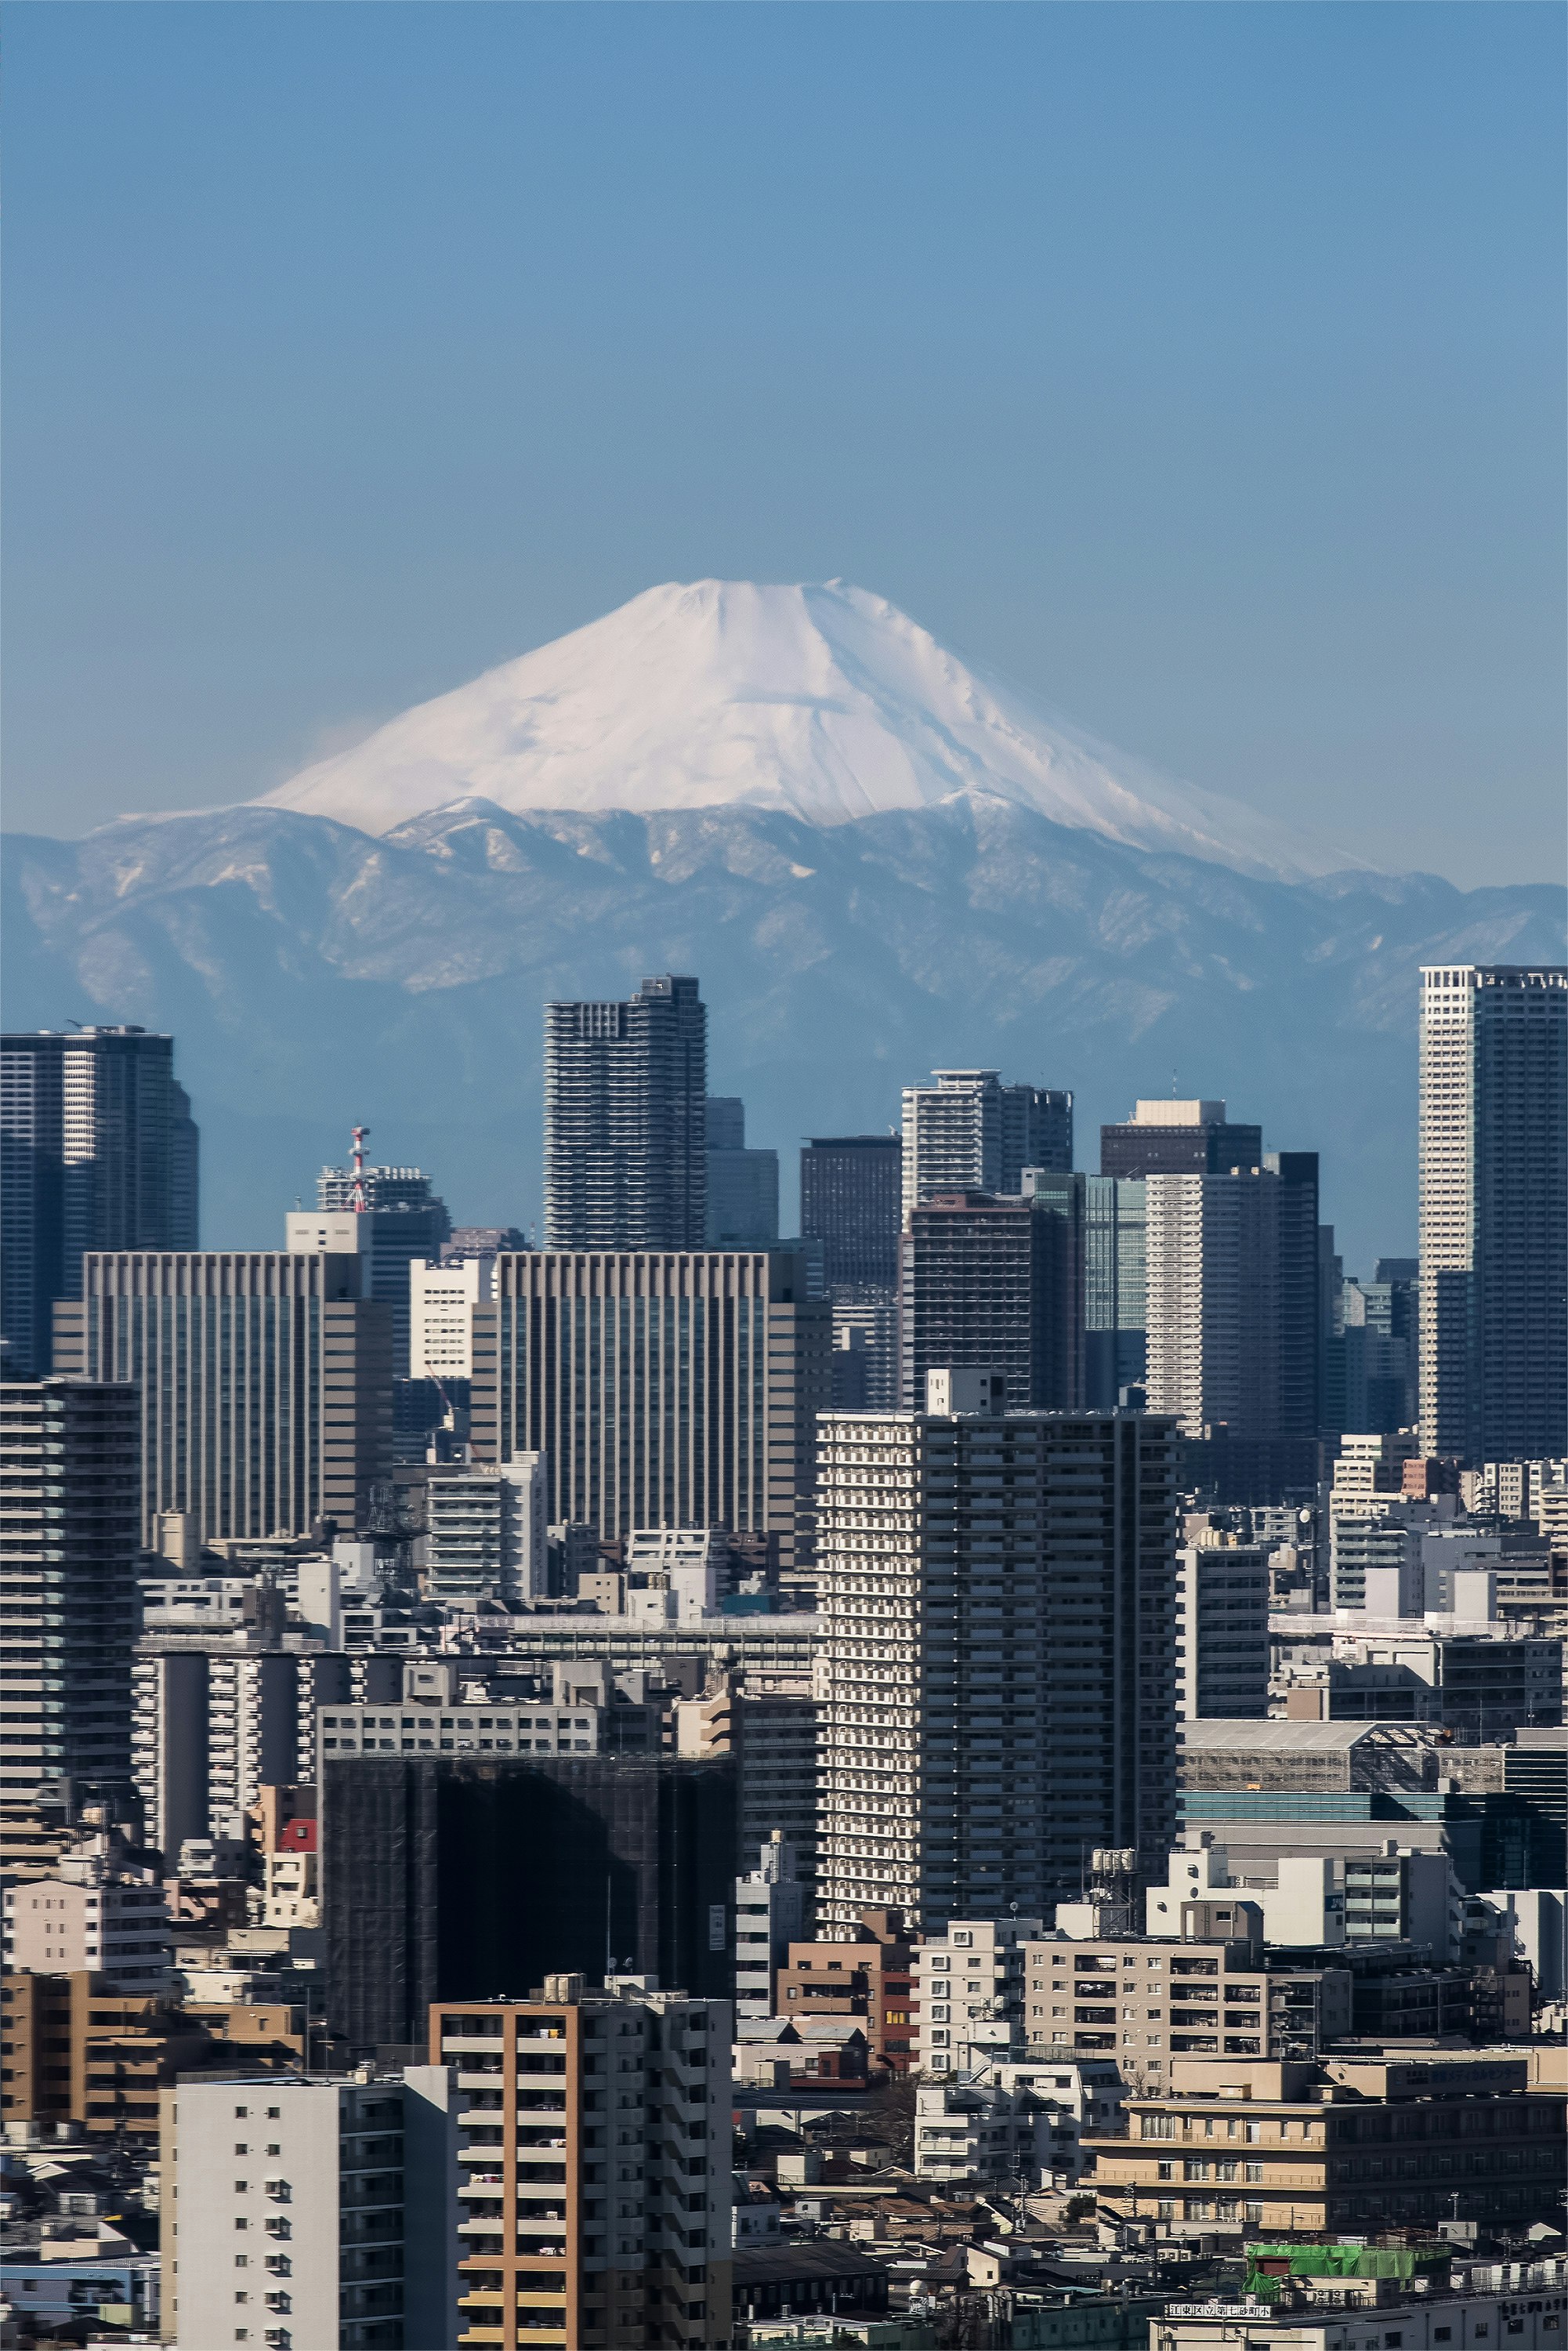 The snow-covered Mt Fuji looms over the Tokyo skyline